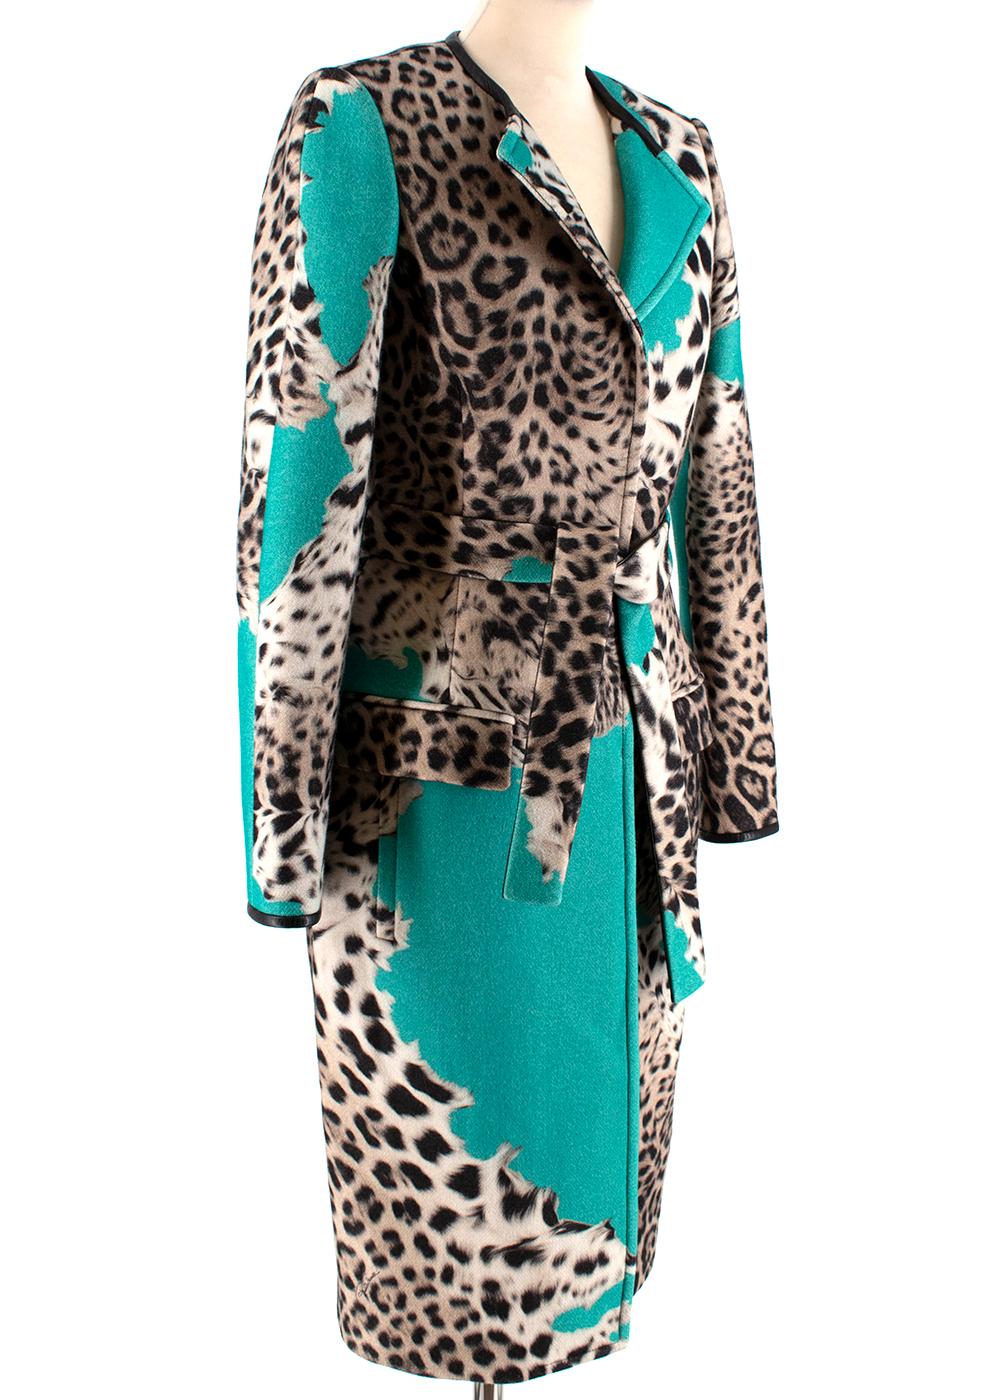 Roberto Cavalli Wool Blend Leopard Teal Longline Coat

- Soft wool/cashmere blend 
- Complete leopard design with teal accents 
- Single breasted 
- Round neck 
- Concealed front button fastening 
- False flap pockets 
- Leather lined tie waist